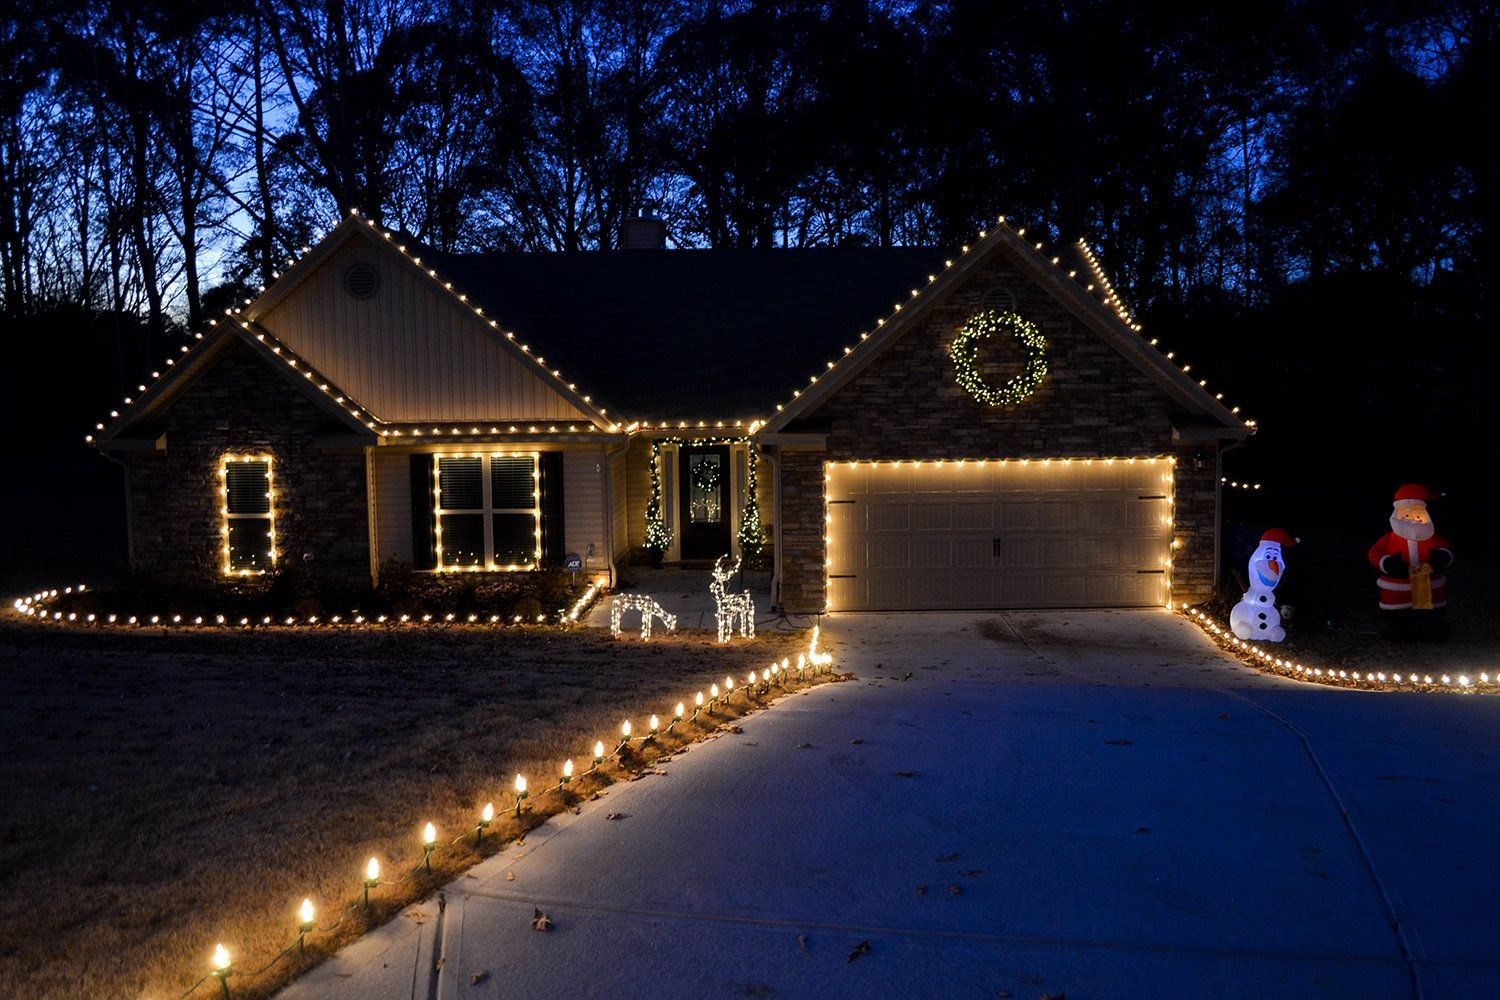 Hang Christmas Lights Across The Roof And Down The Driveway regarding sizing 1500 X 1000